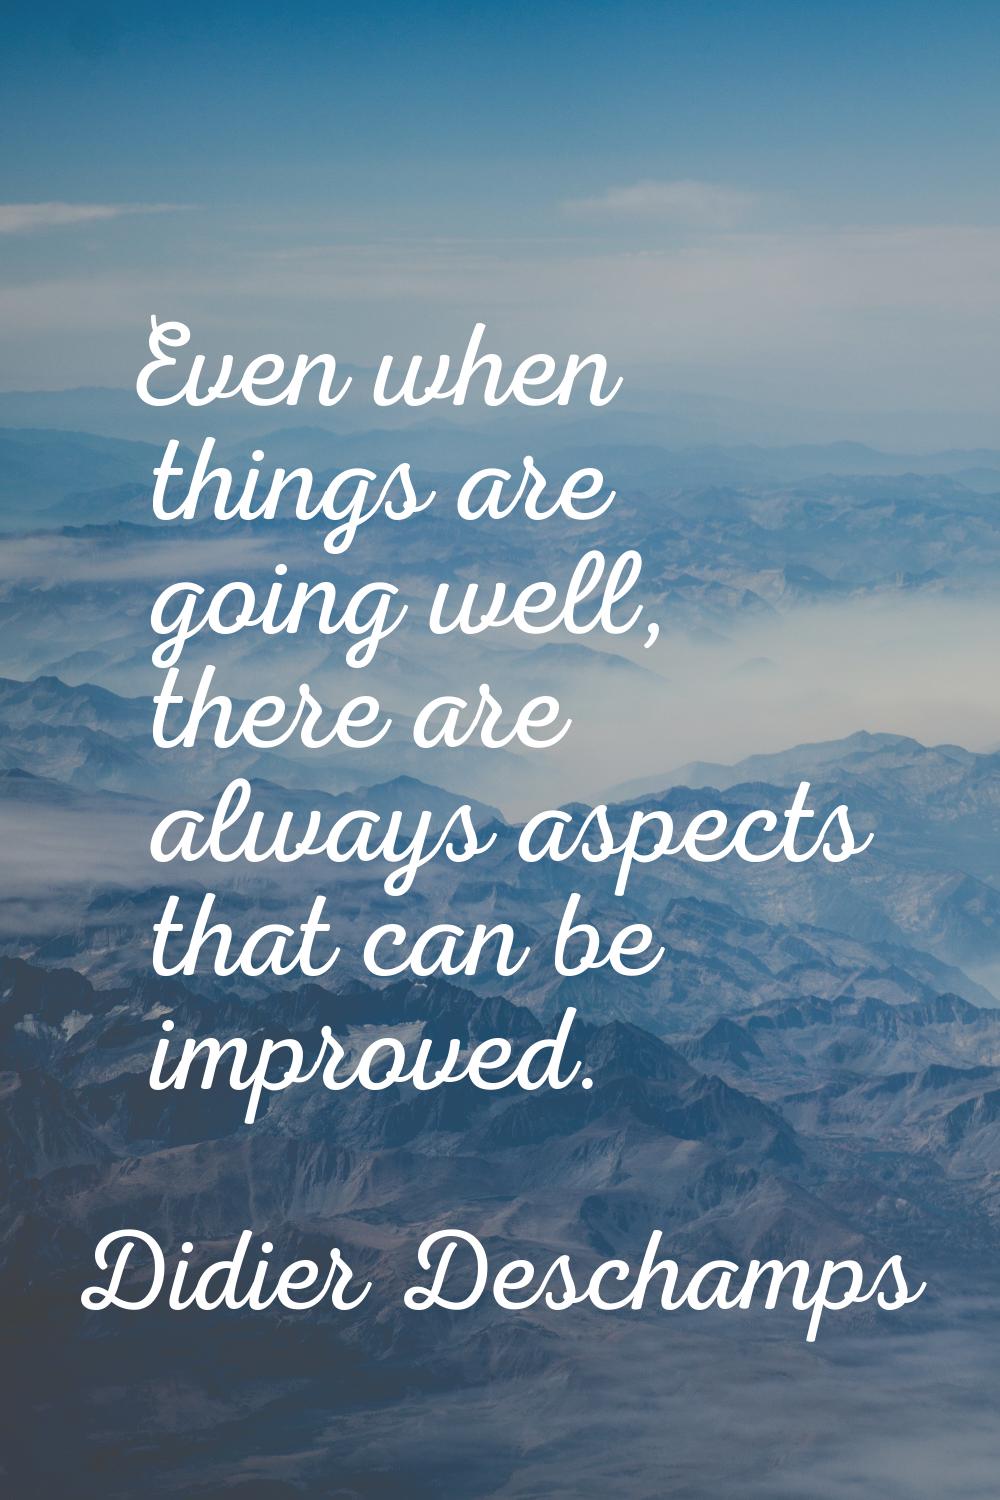 Even when things are going well, there are always aspects that can be improved.